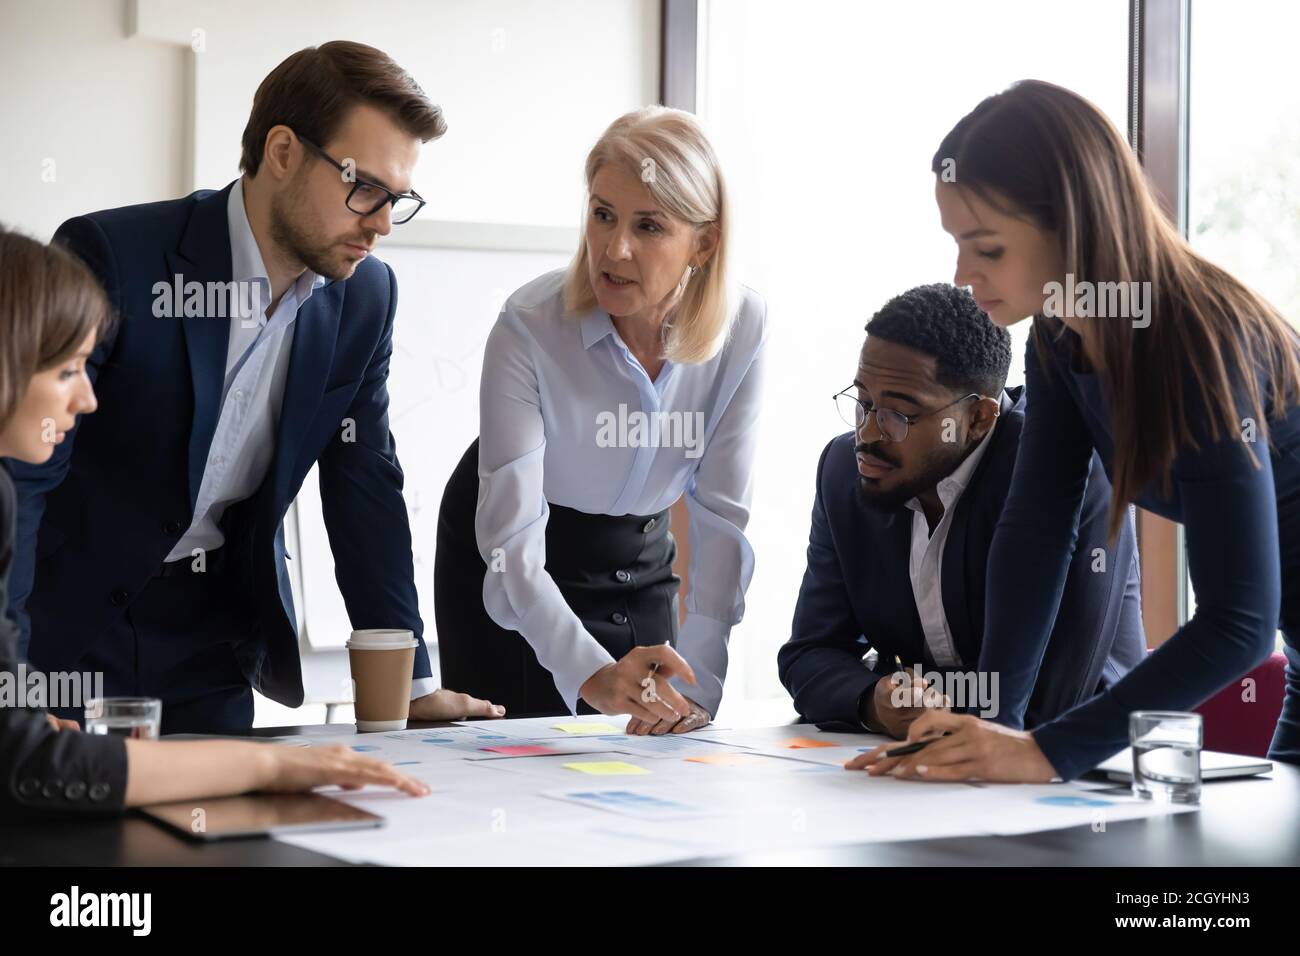 Focused diverse businesspeople discuss paperwork at meeting Stock Photo